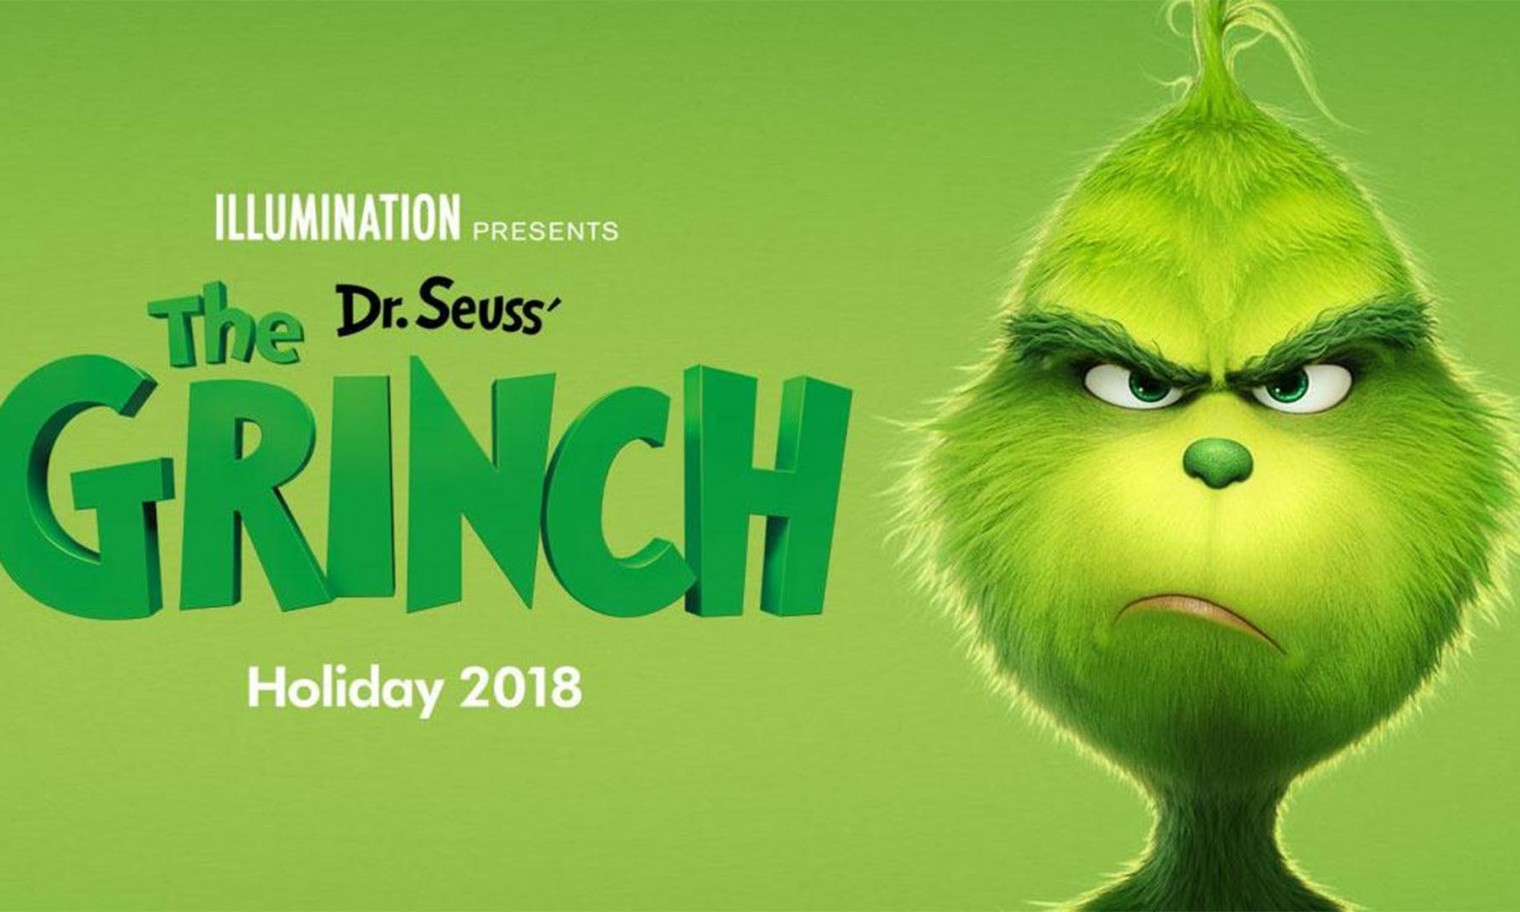 Who Did It Better: How The Grinch Stole Christmas - Big Picture Film Club